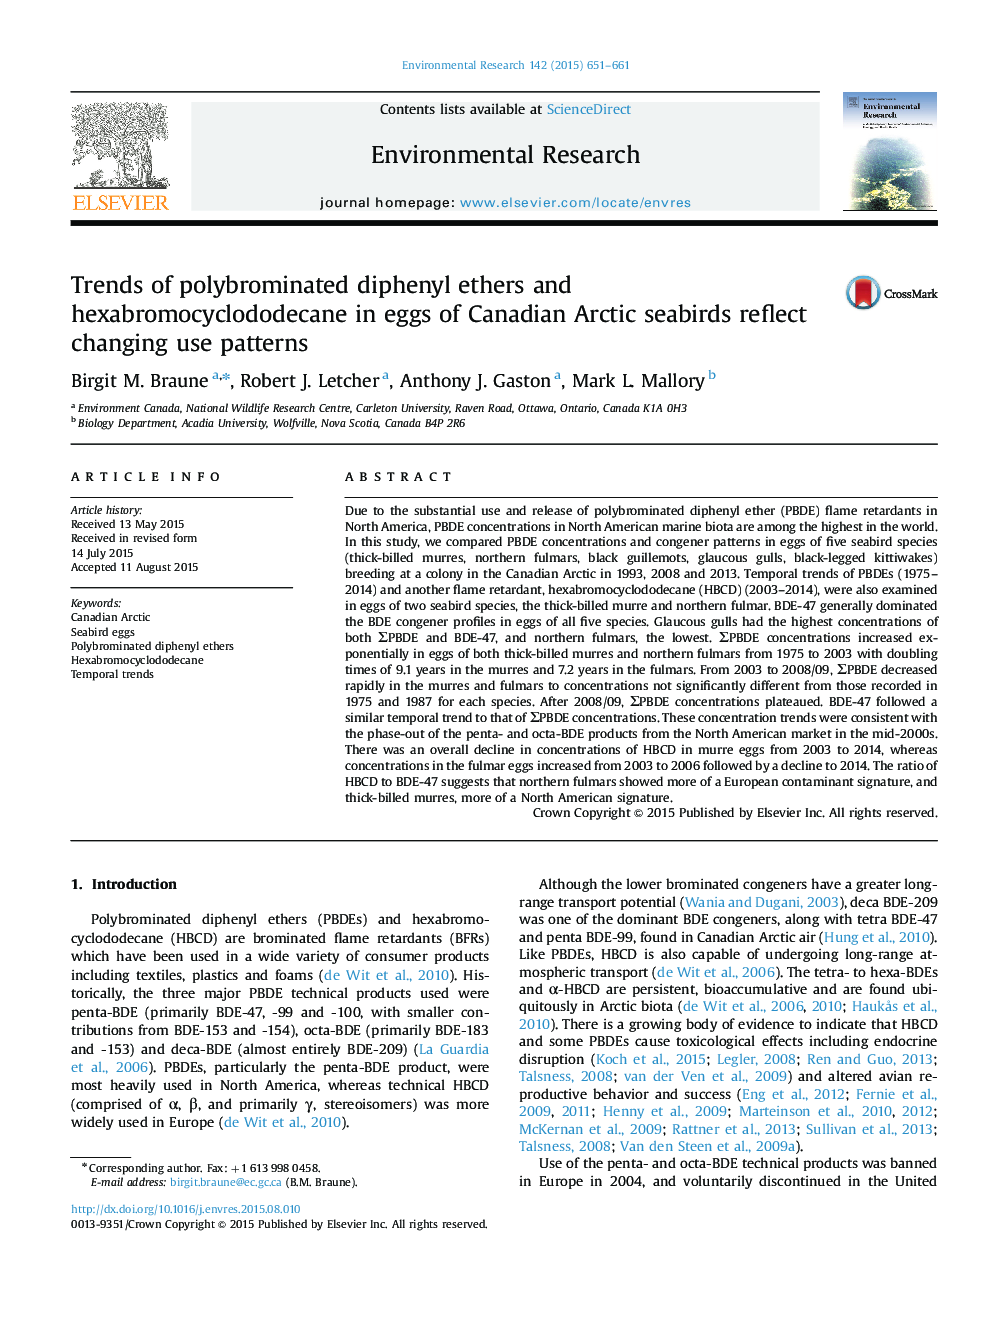 Trends of polybrominated diphenyl ethers and hexabromocyclododecane in eggs of Canadian Arctic seabirds reflect changing use patterns